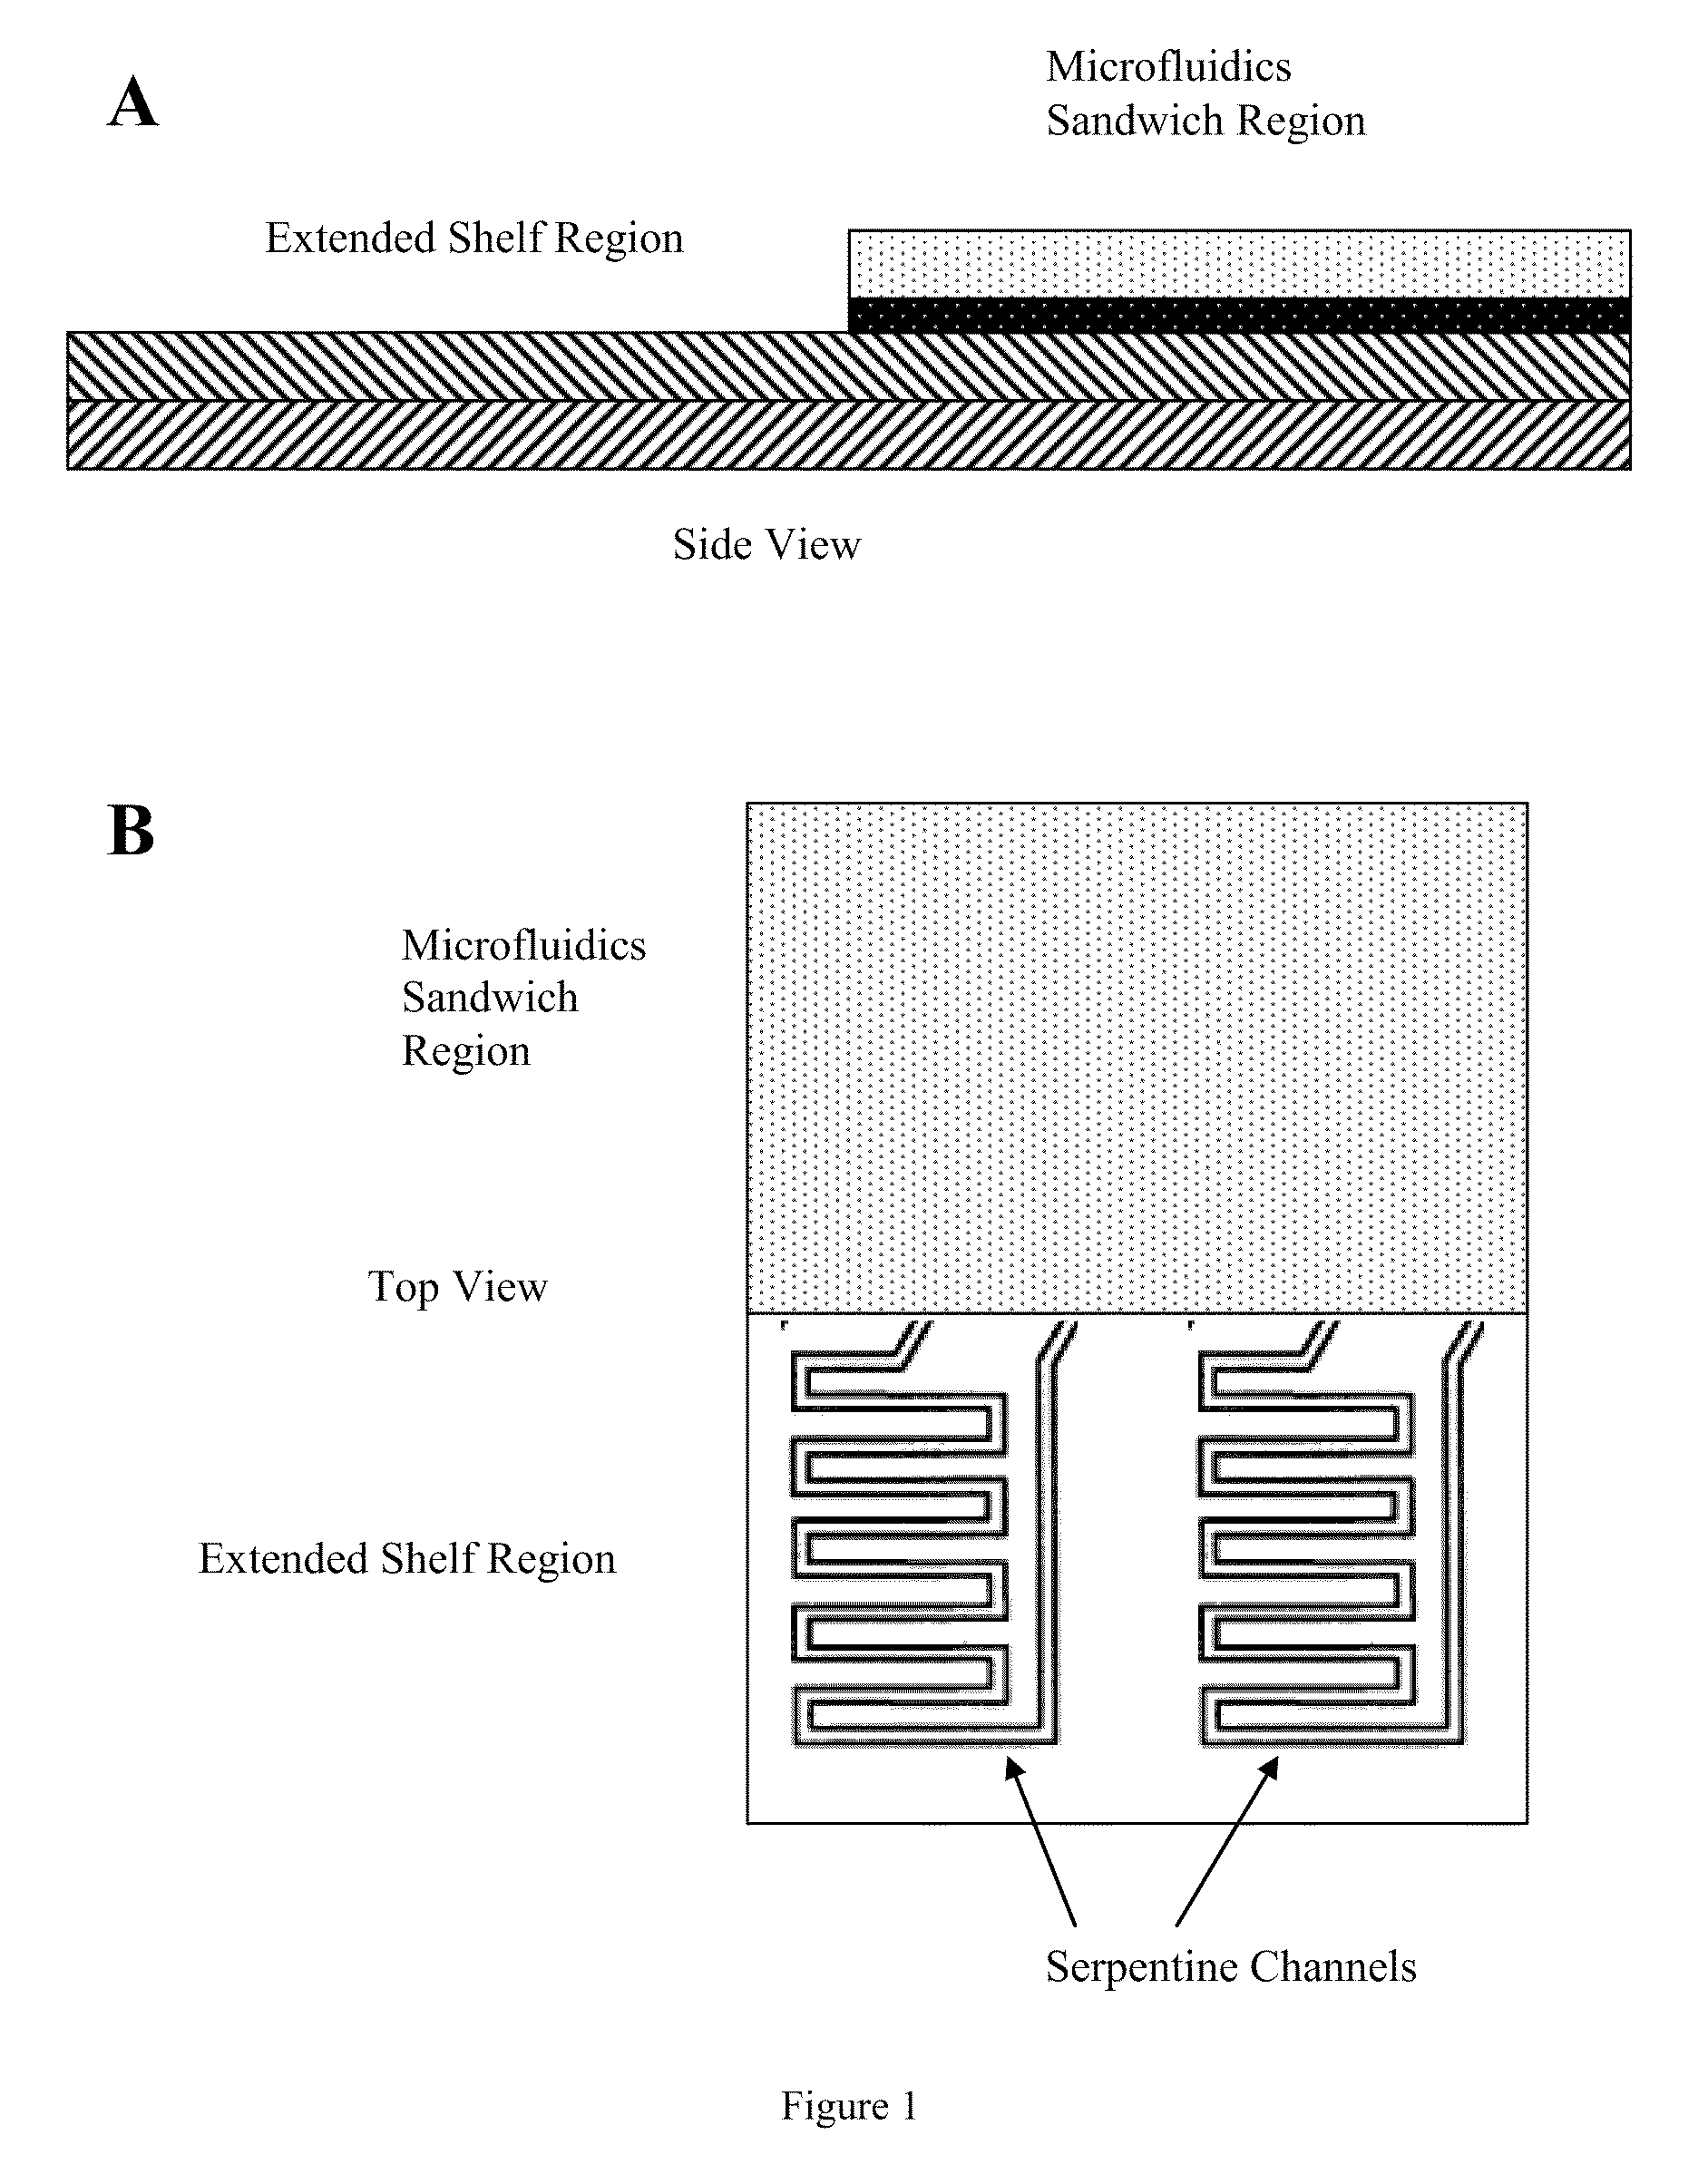 Instrument with microfluidic chip